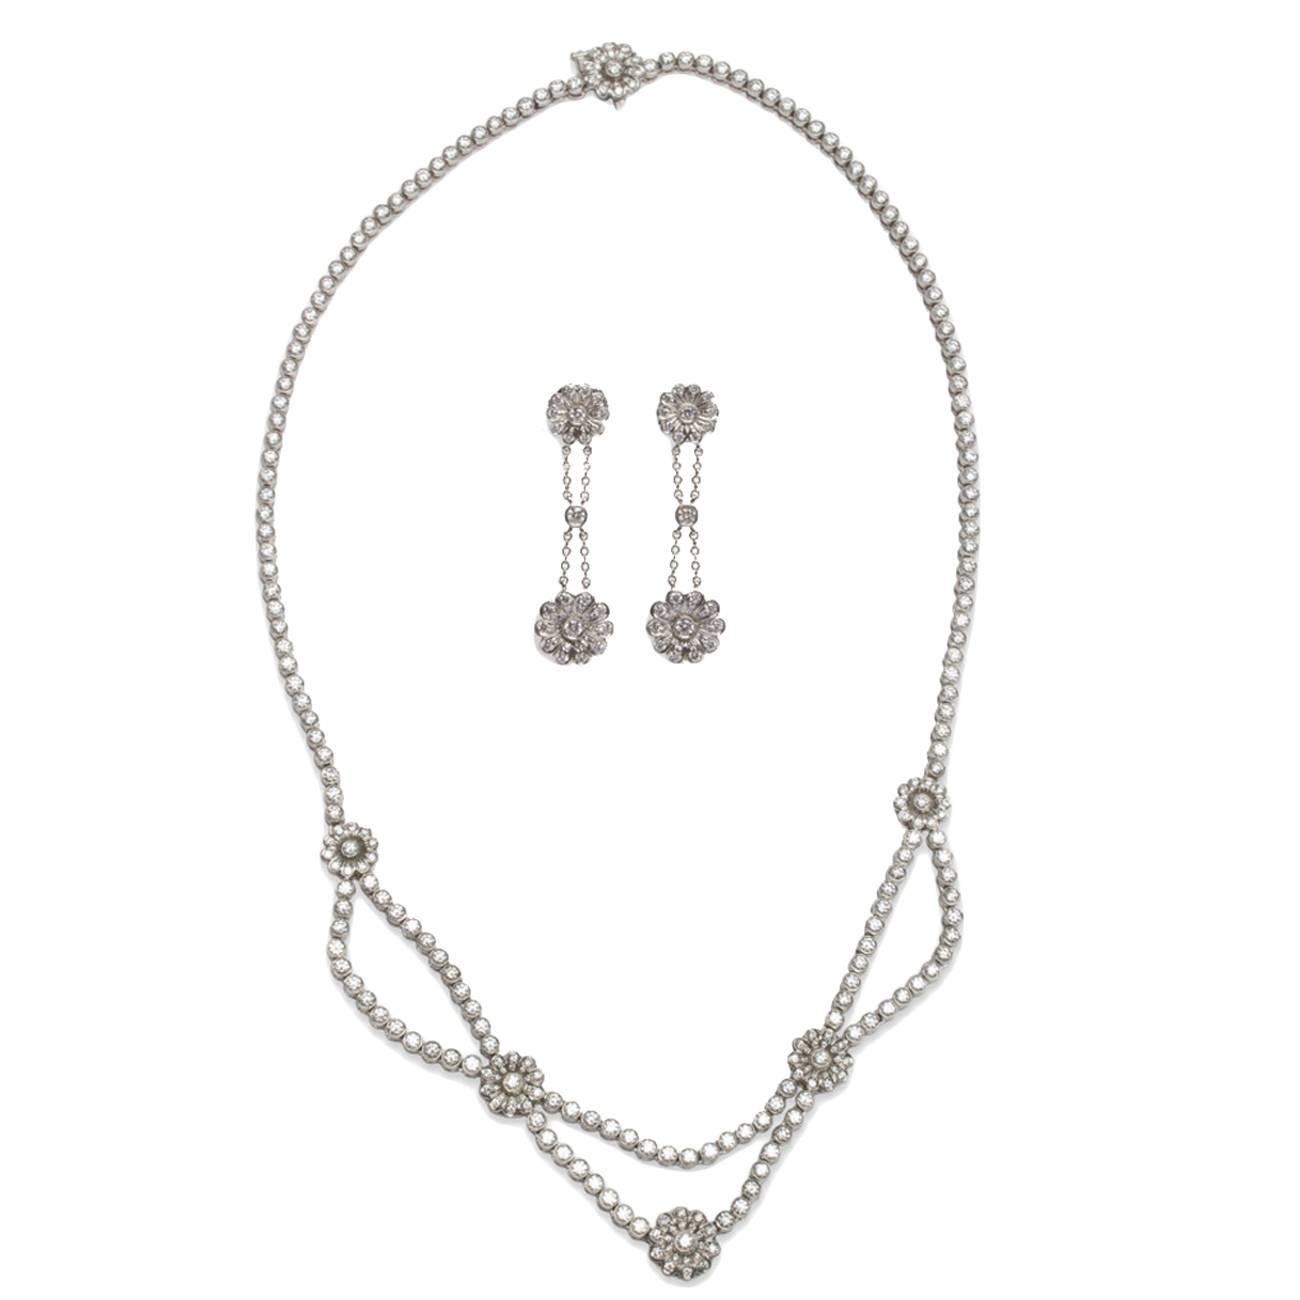 Tiffany & Co. Diamond Platinum Necklace and Earring Set For Sale